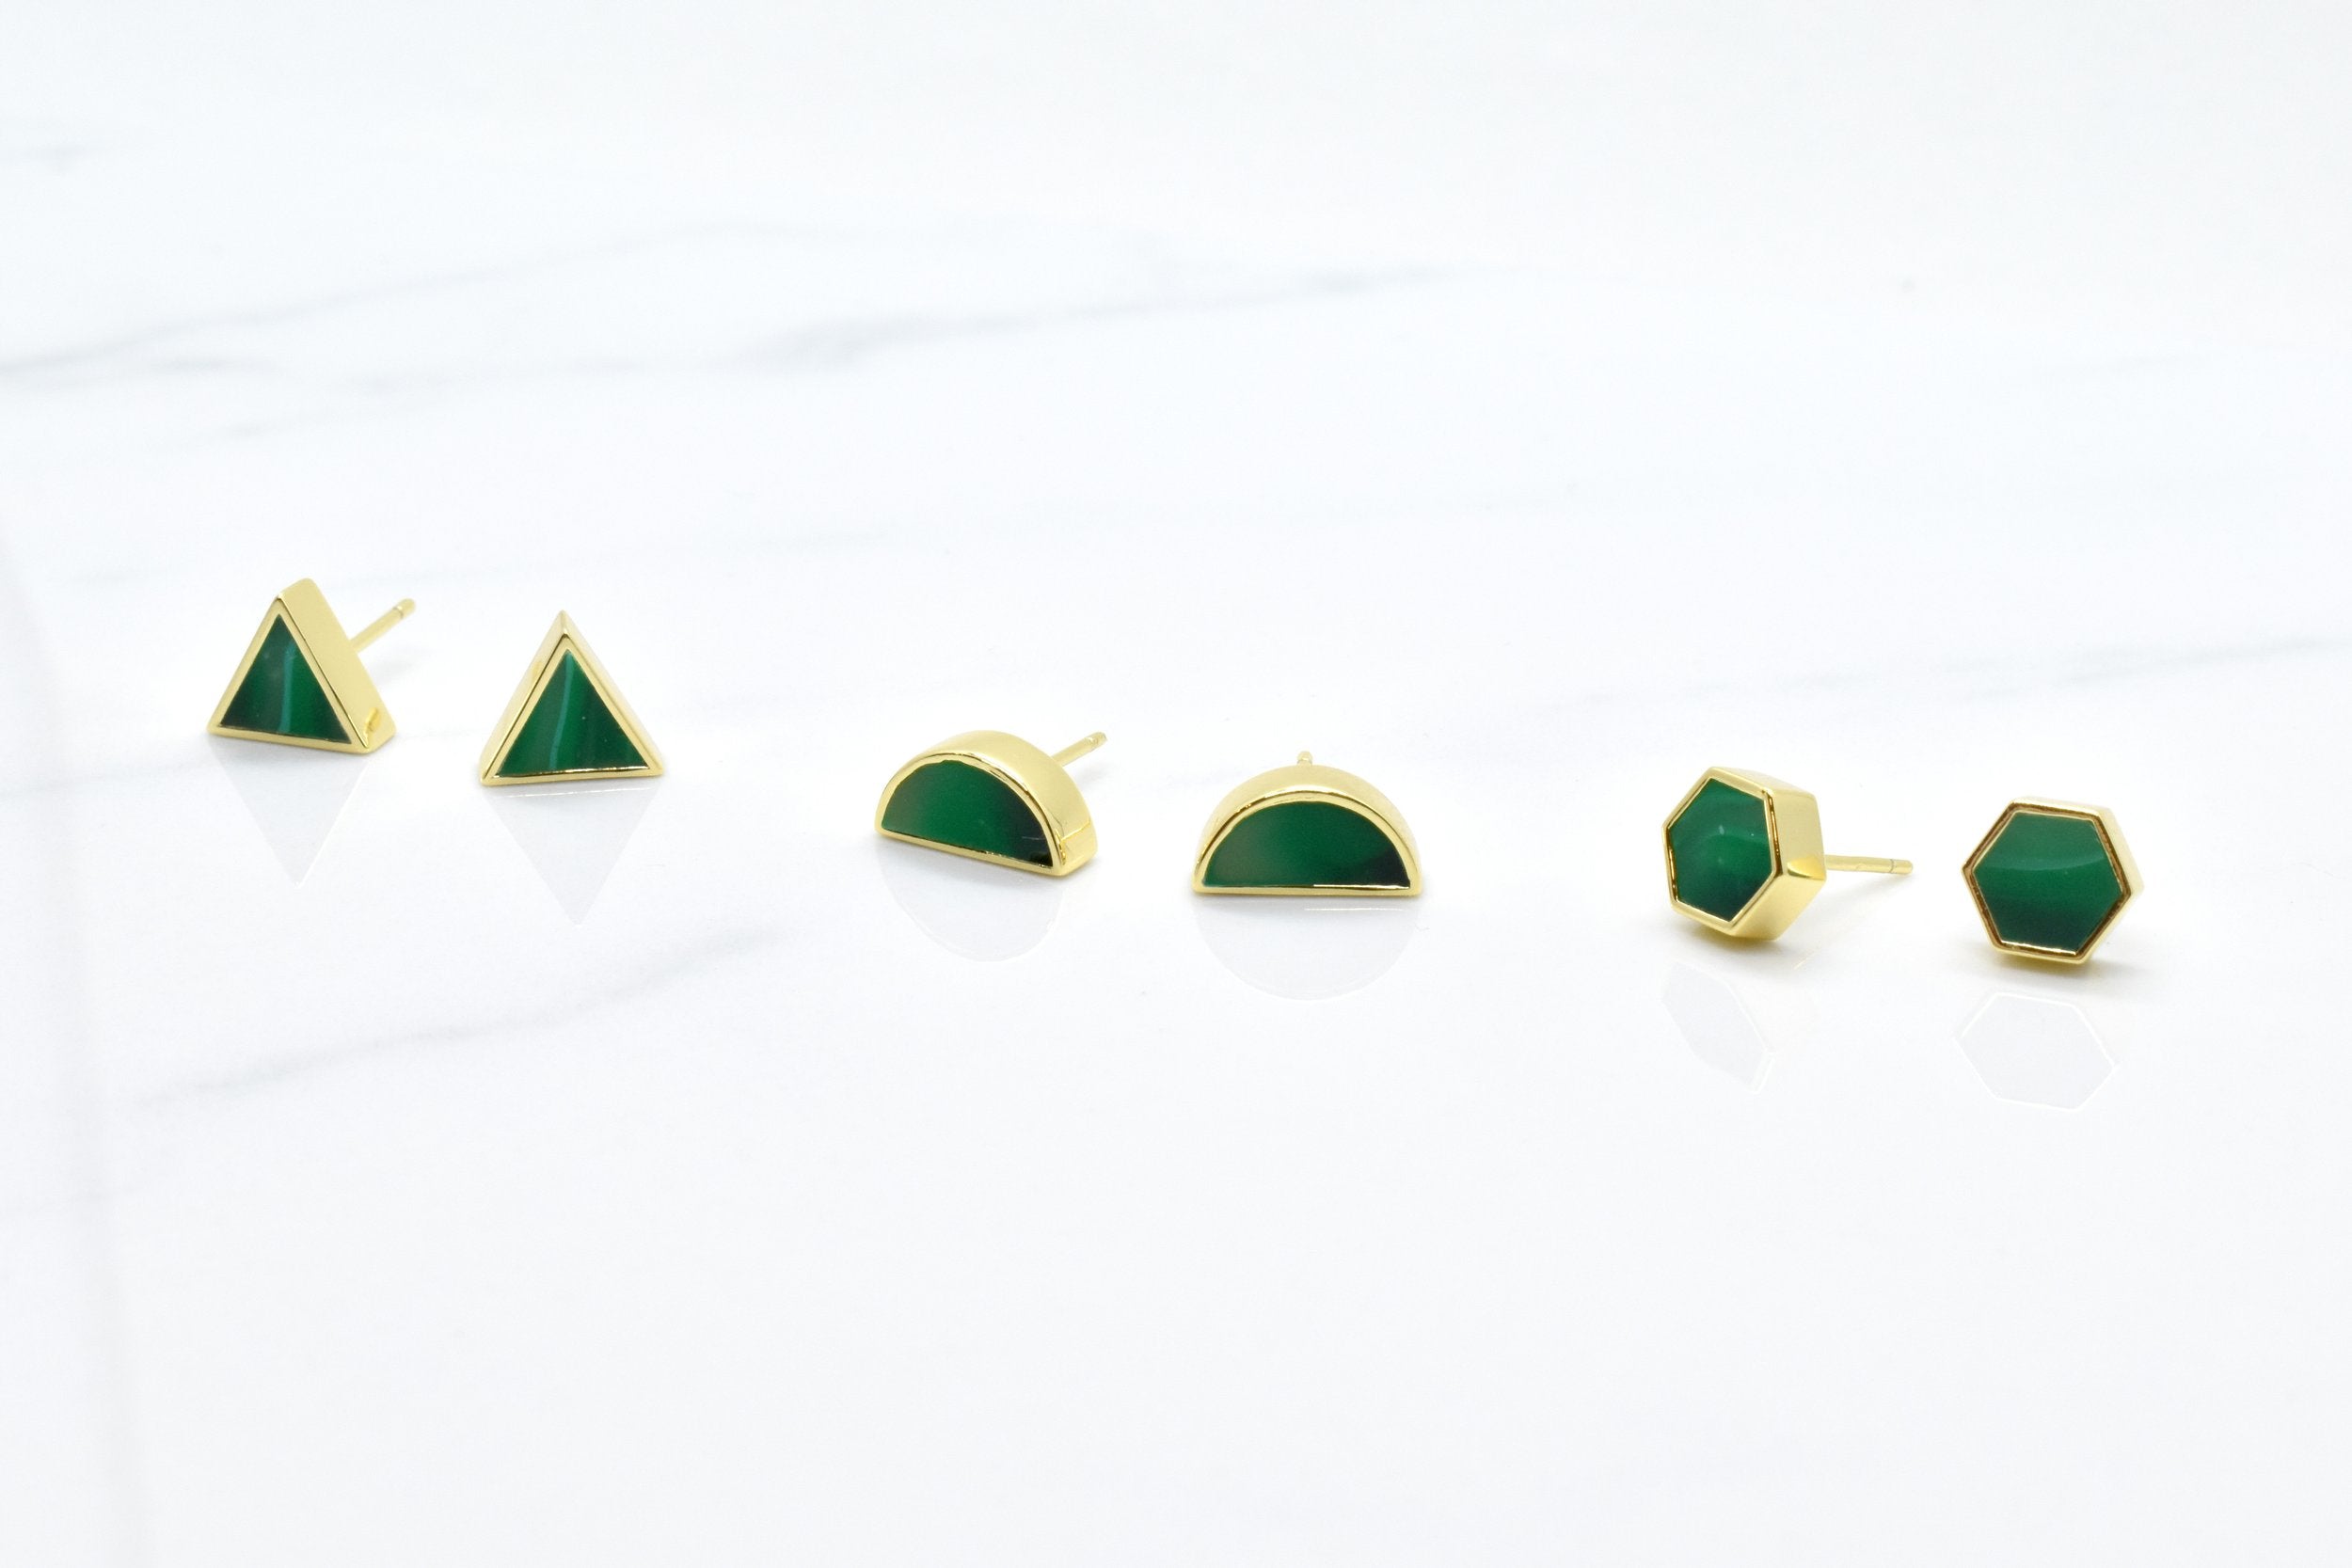 a set of a three different sets of stud earrings in a emerald looking clay that's been hand marbled. One pair of half moon earrings, one pair of triangle studs, and one pair of hexagon stud earrings